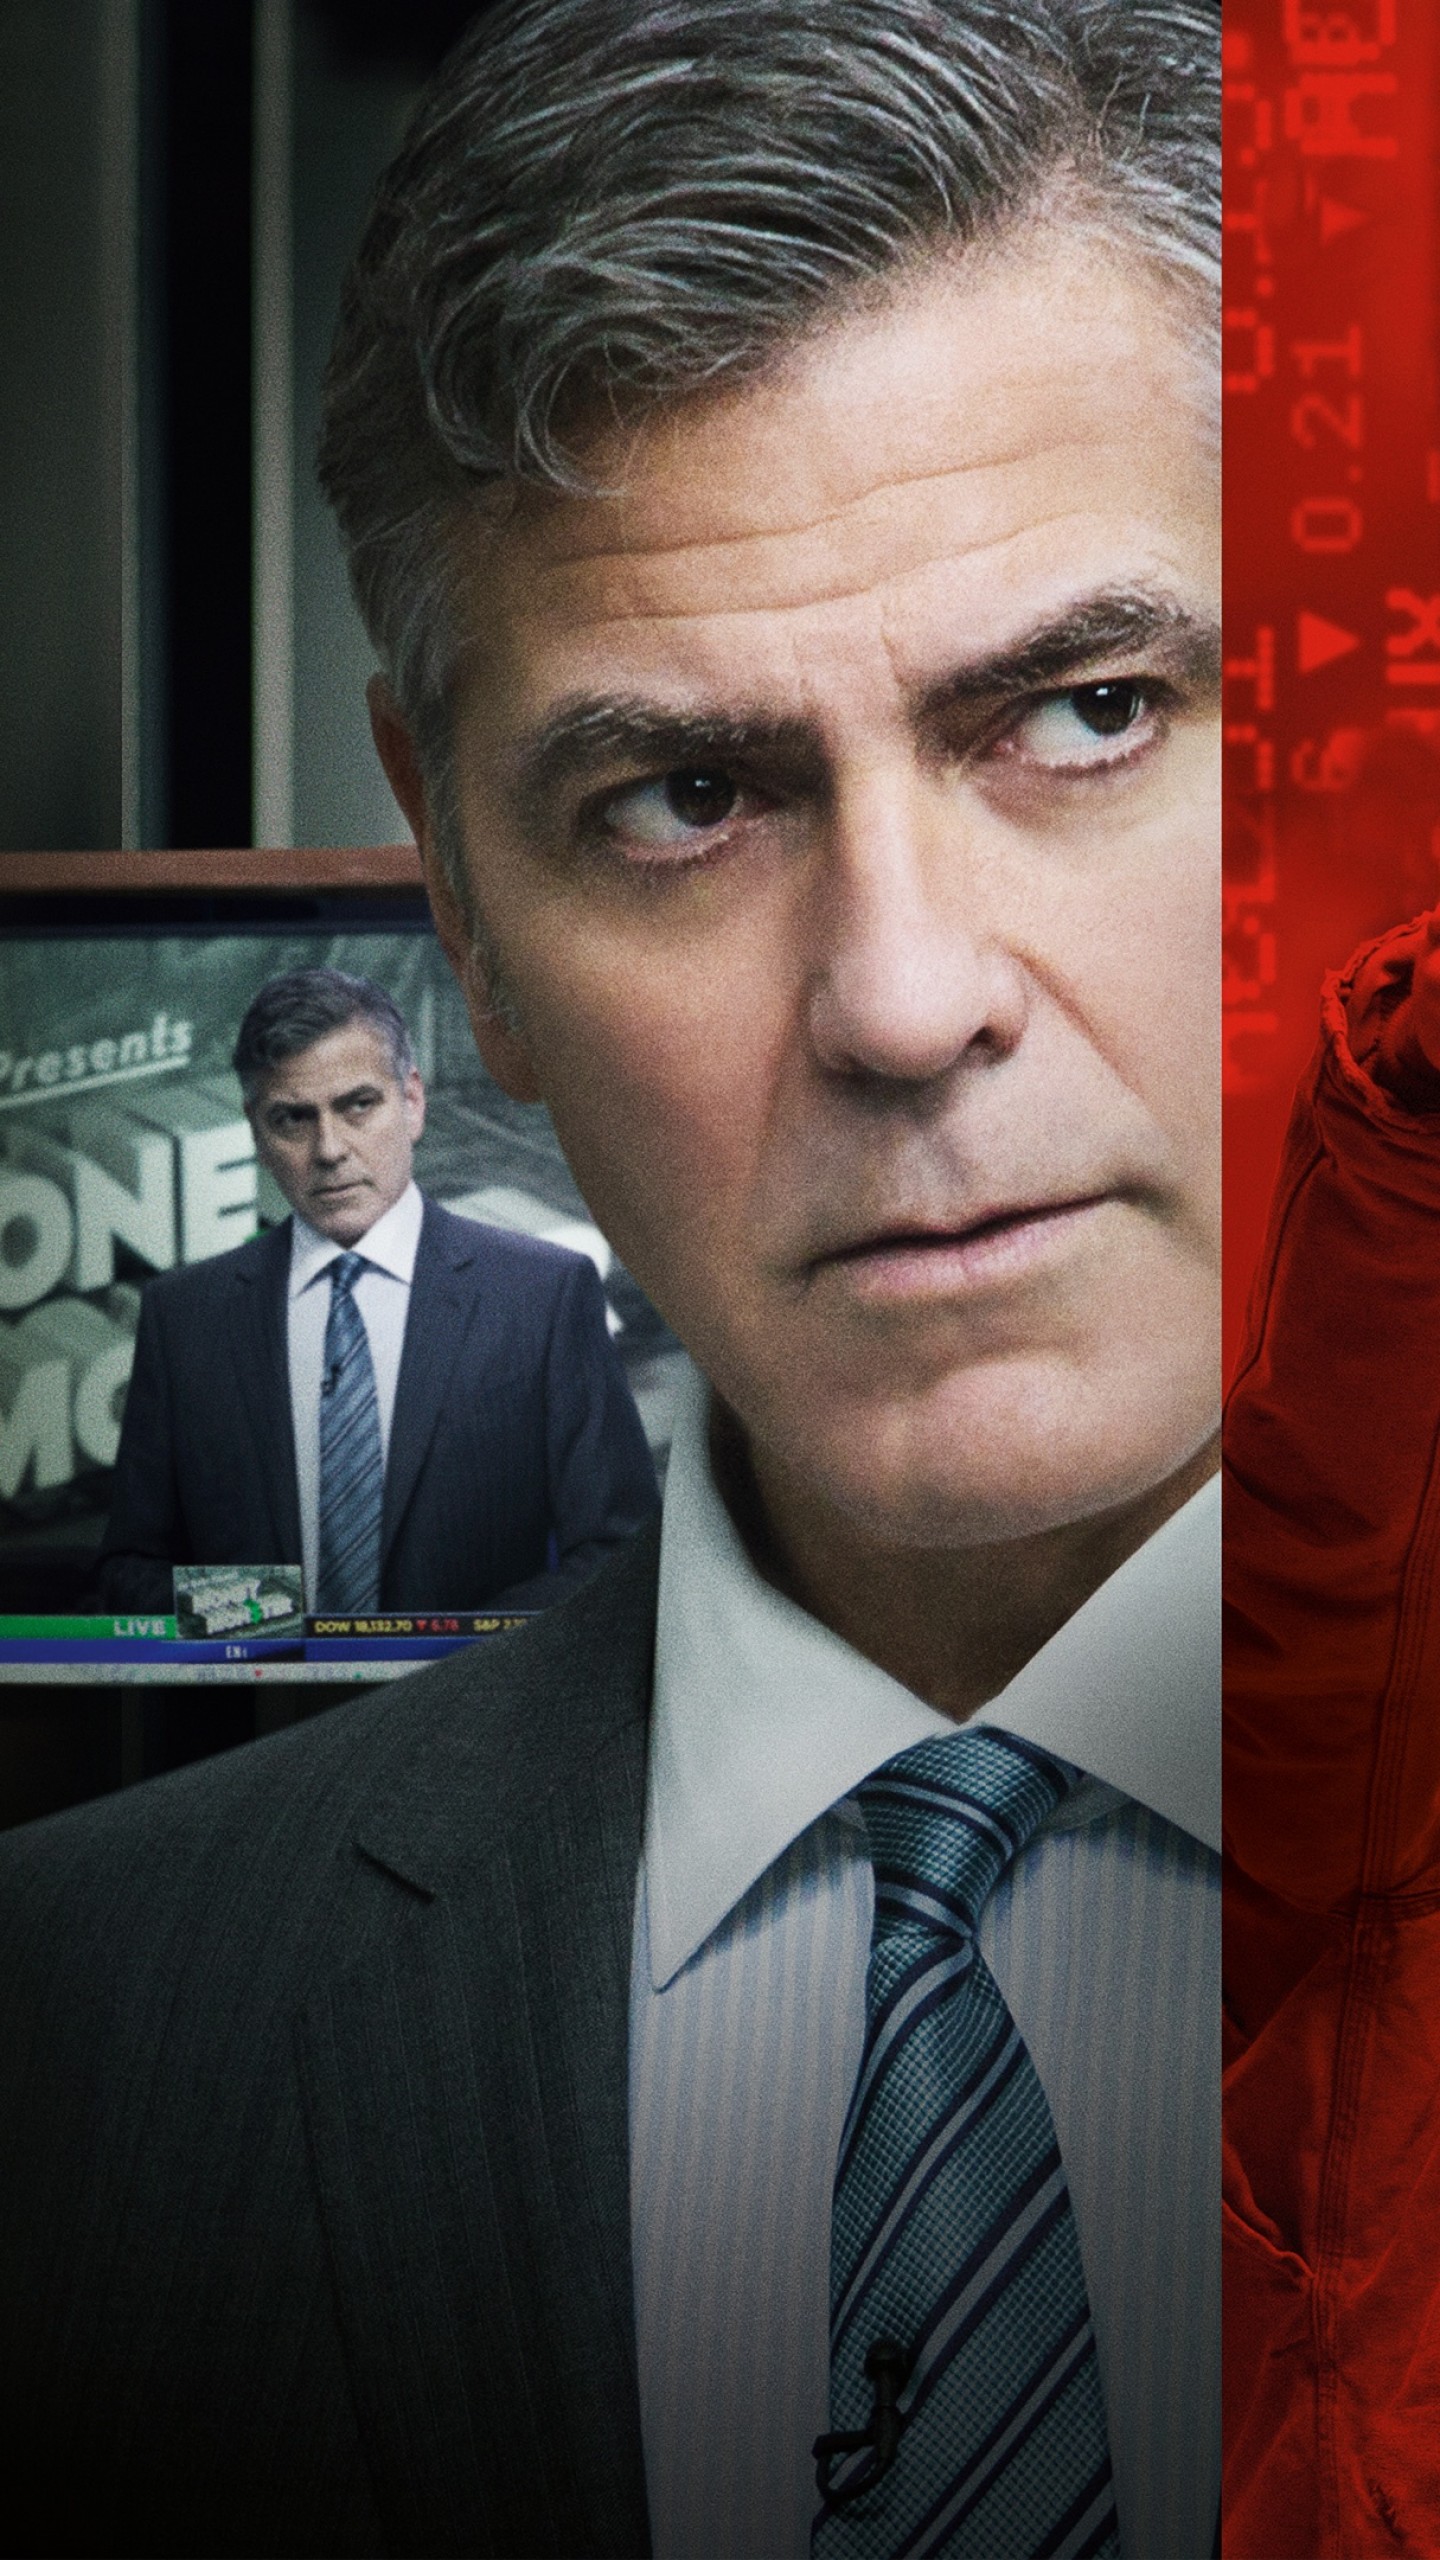 Free Download Wallpaper Money Monster George Clooney Julia Roberts Images, Photos, Reviews